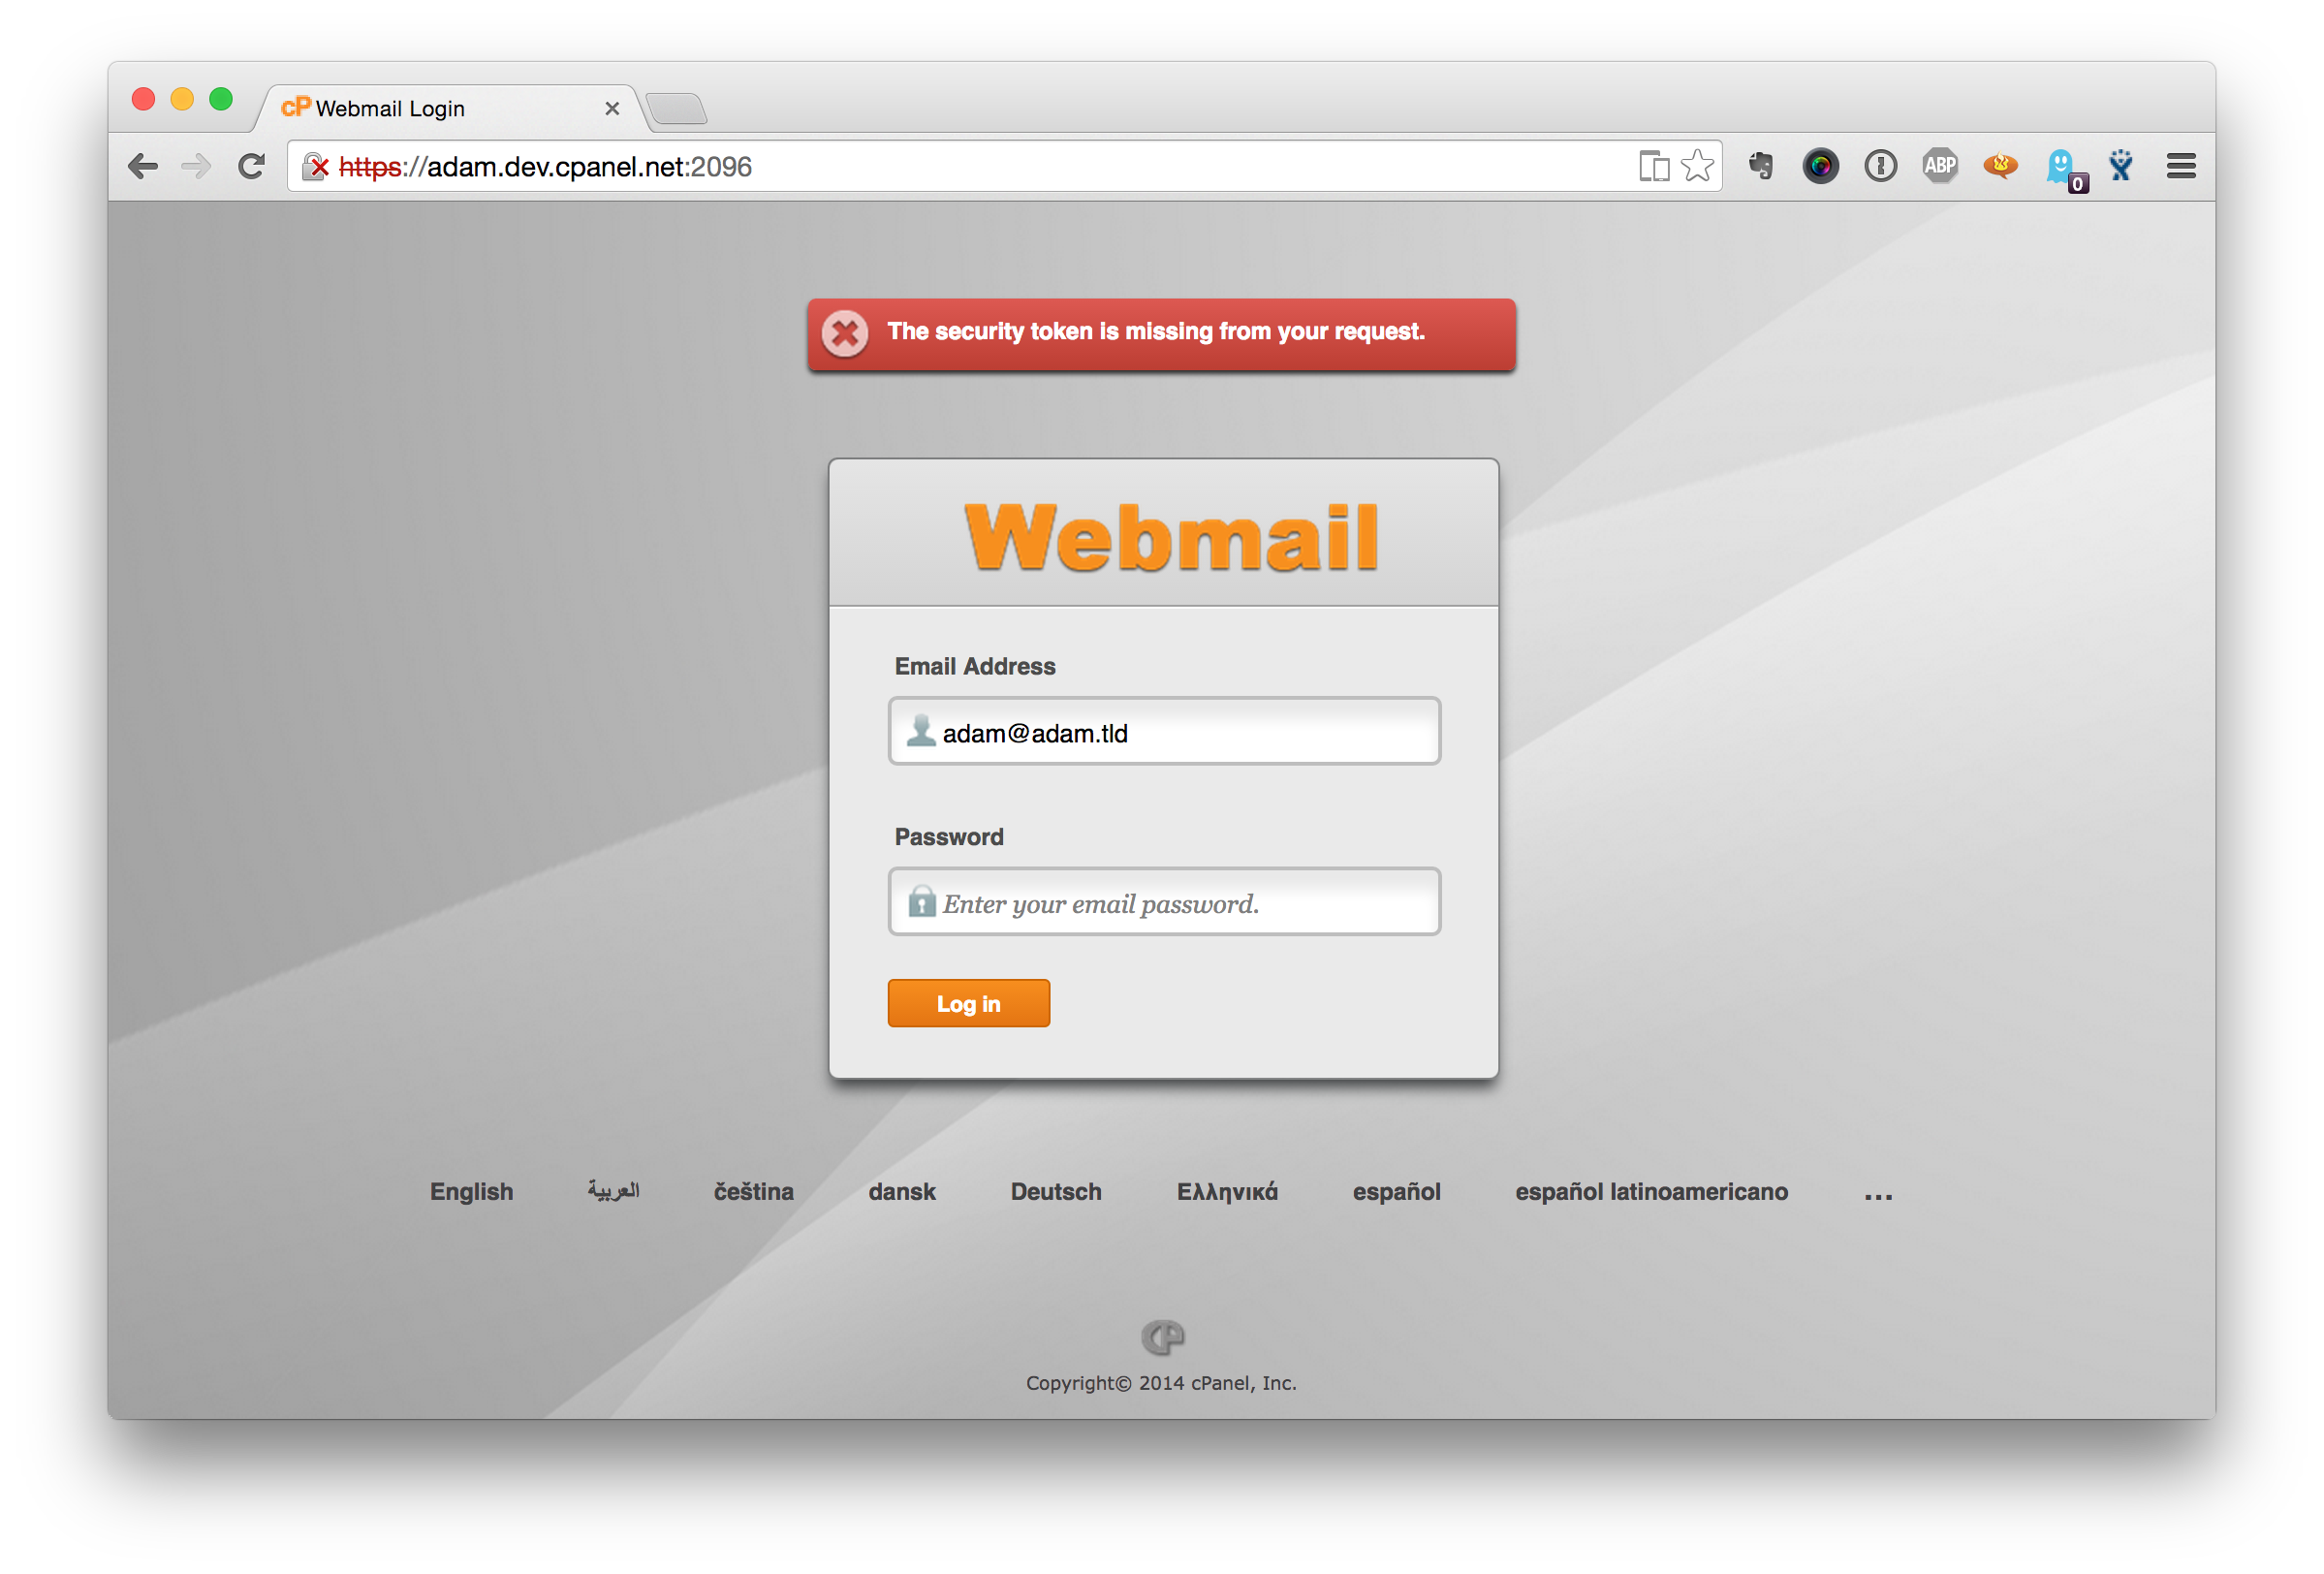 Upcoming changes to the cPanel end-user webmail experience in 11.48.